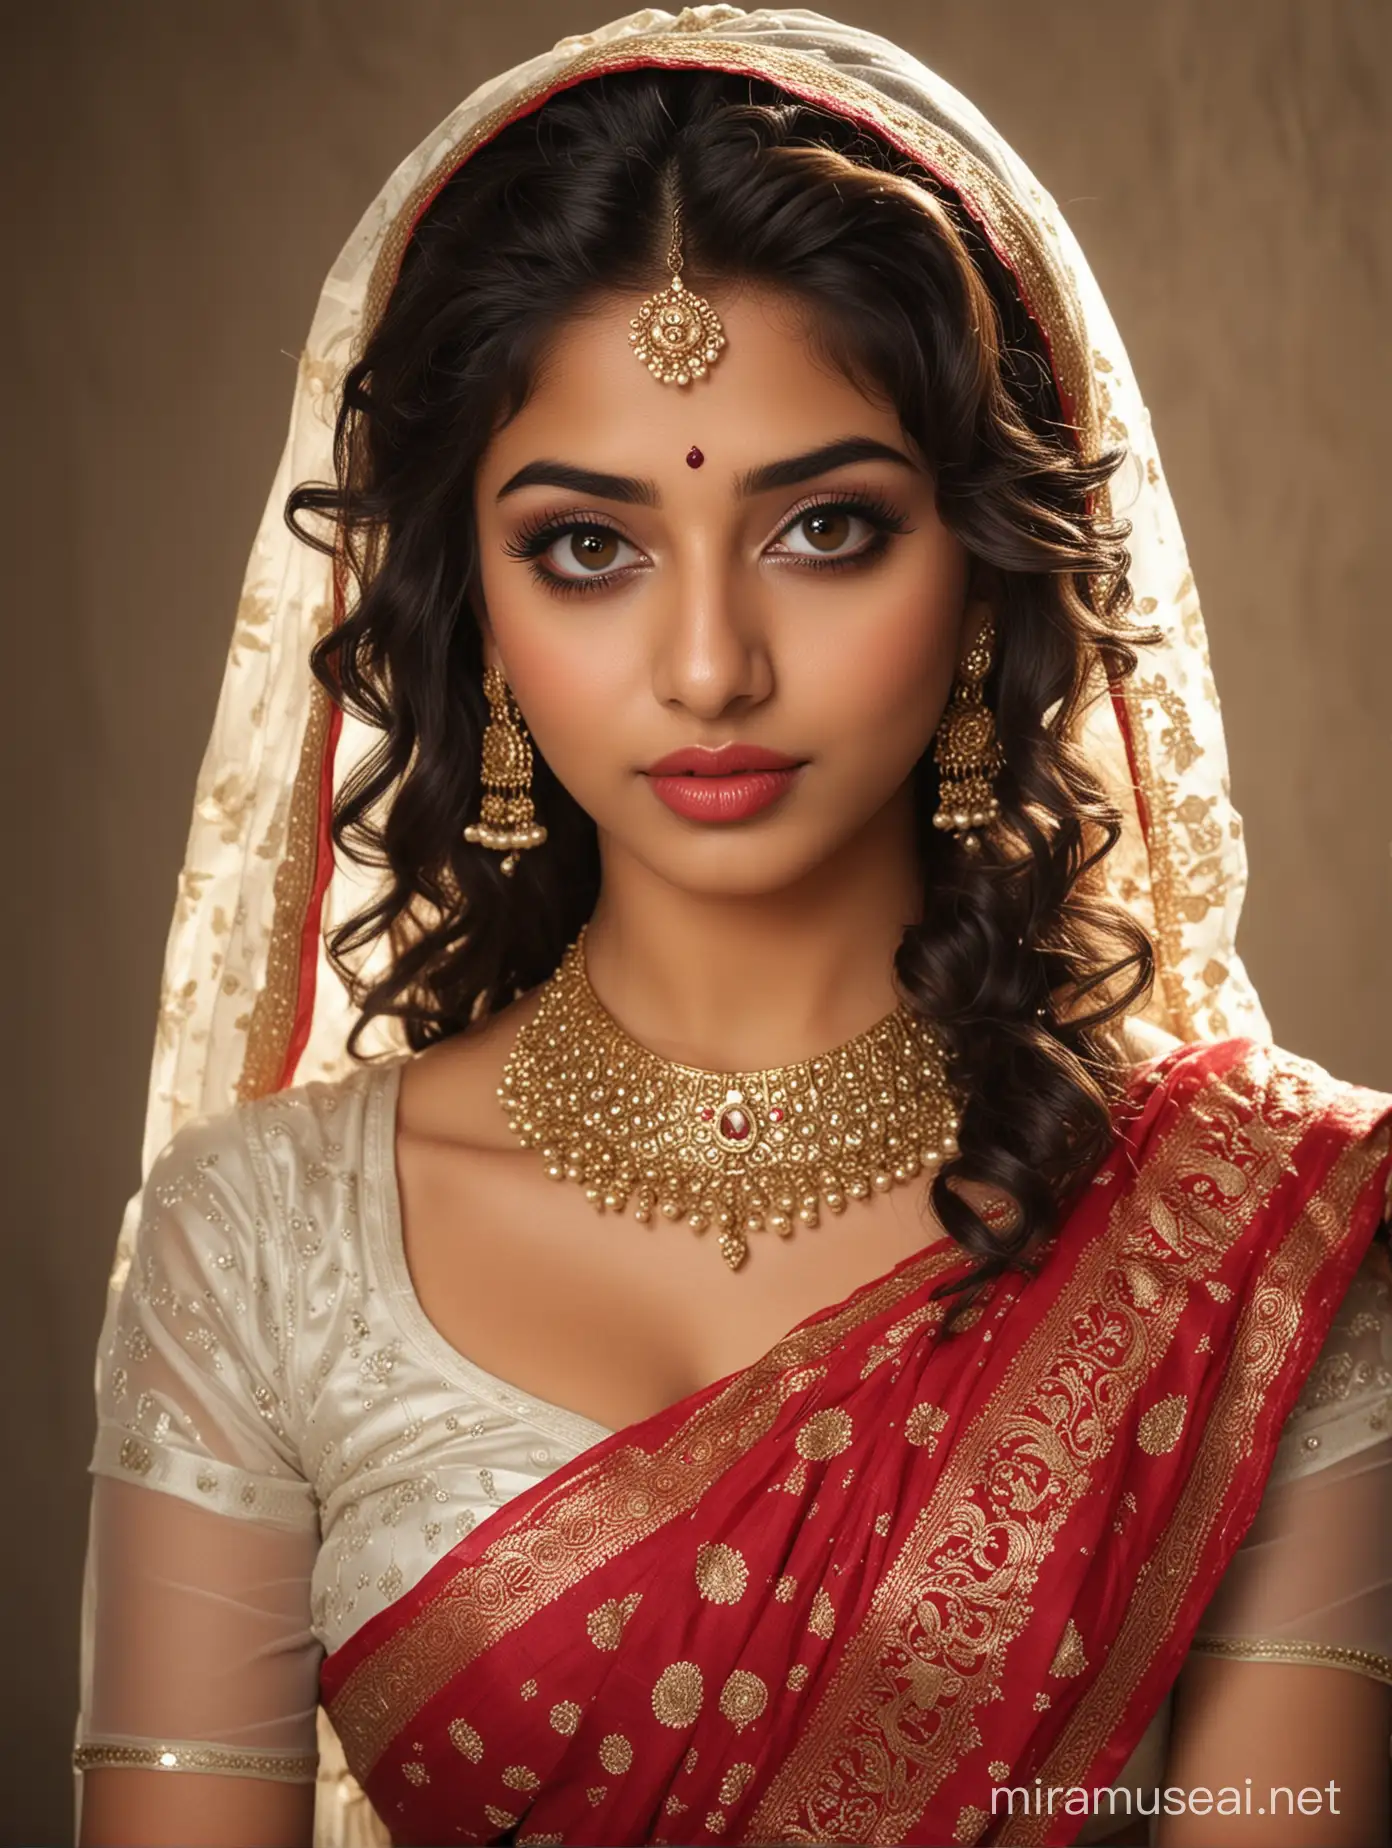 Innocent and Alluring 18YearOld Indian Bride in Traditional Saree